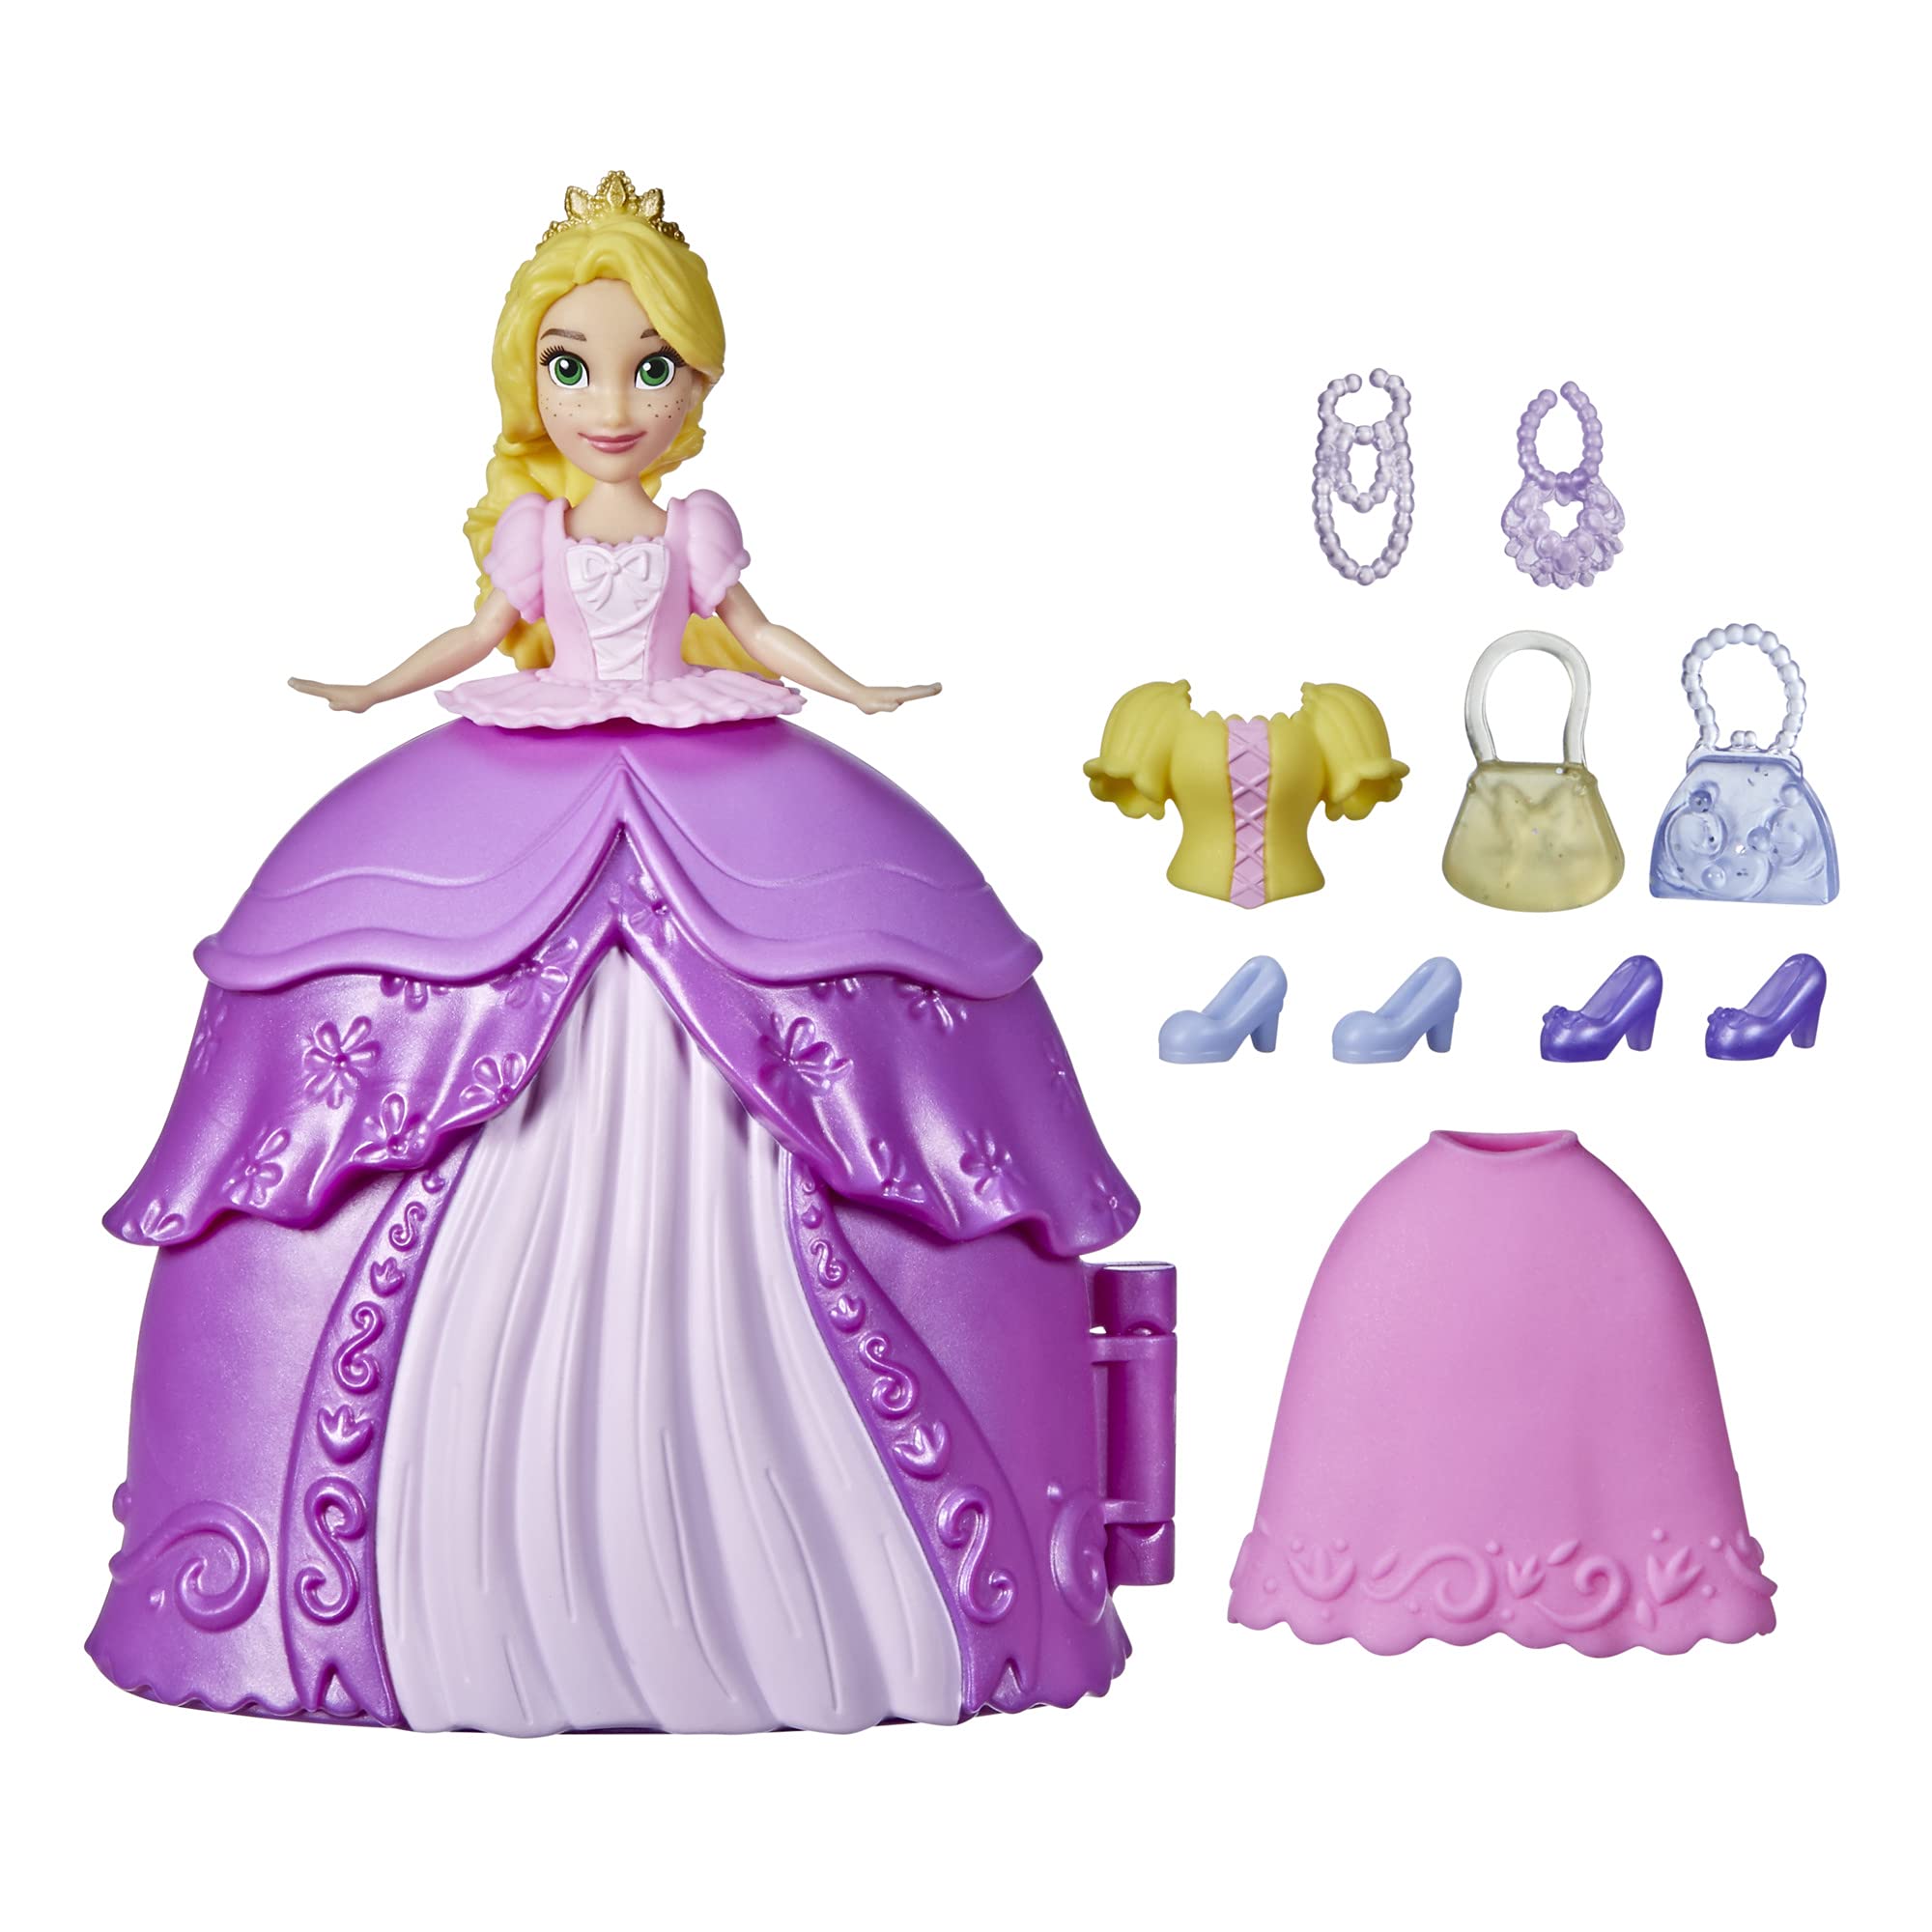 Disney Princess Secret Styles Fashion Surprise Rapunzel, Mini Doll Playset With Extra Clothes And Accessories, Toy For Girls 4 A